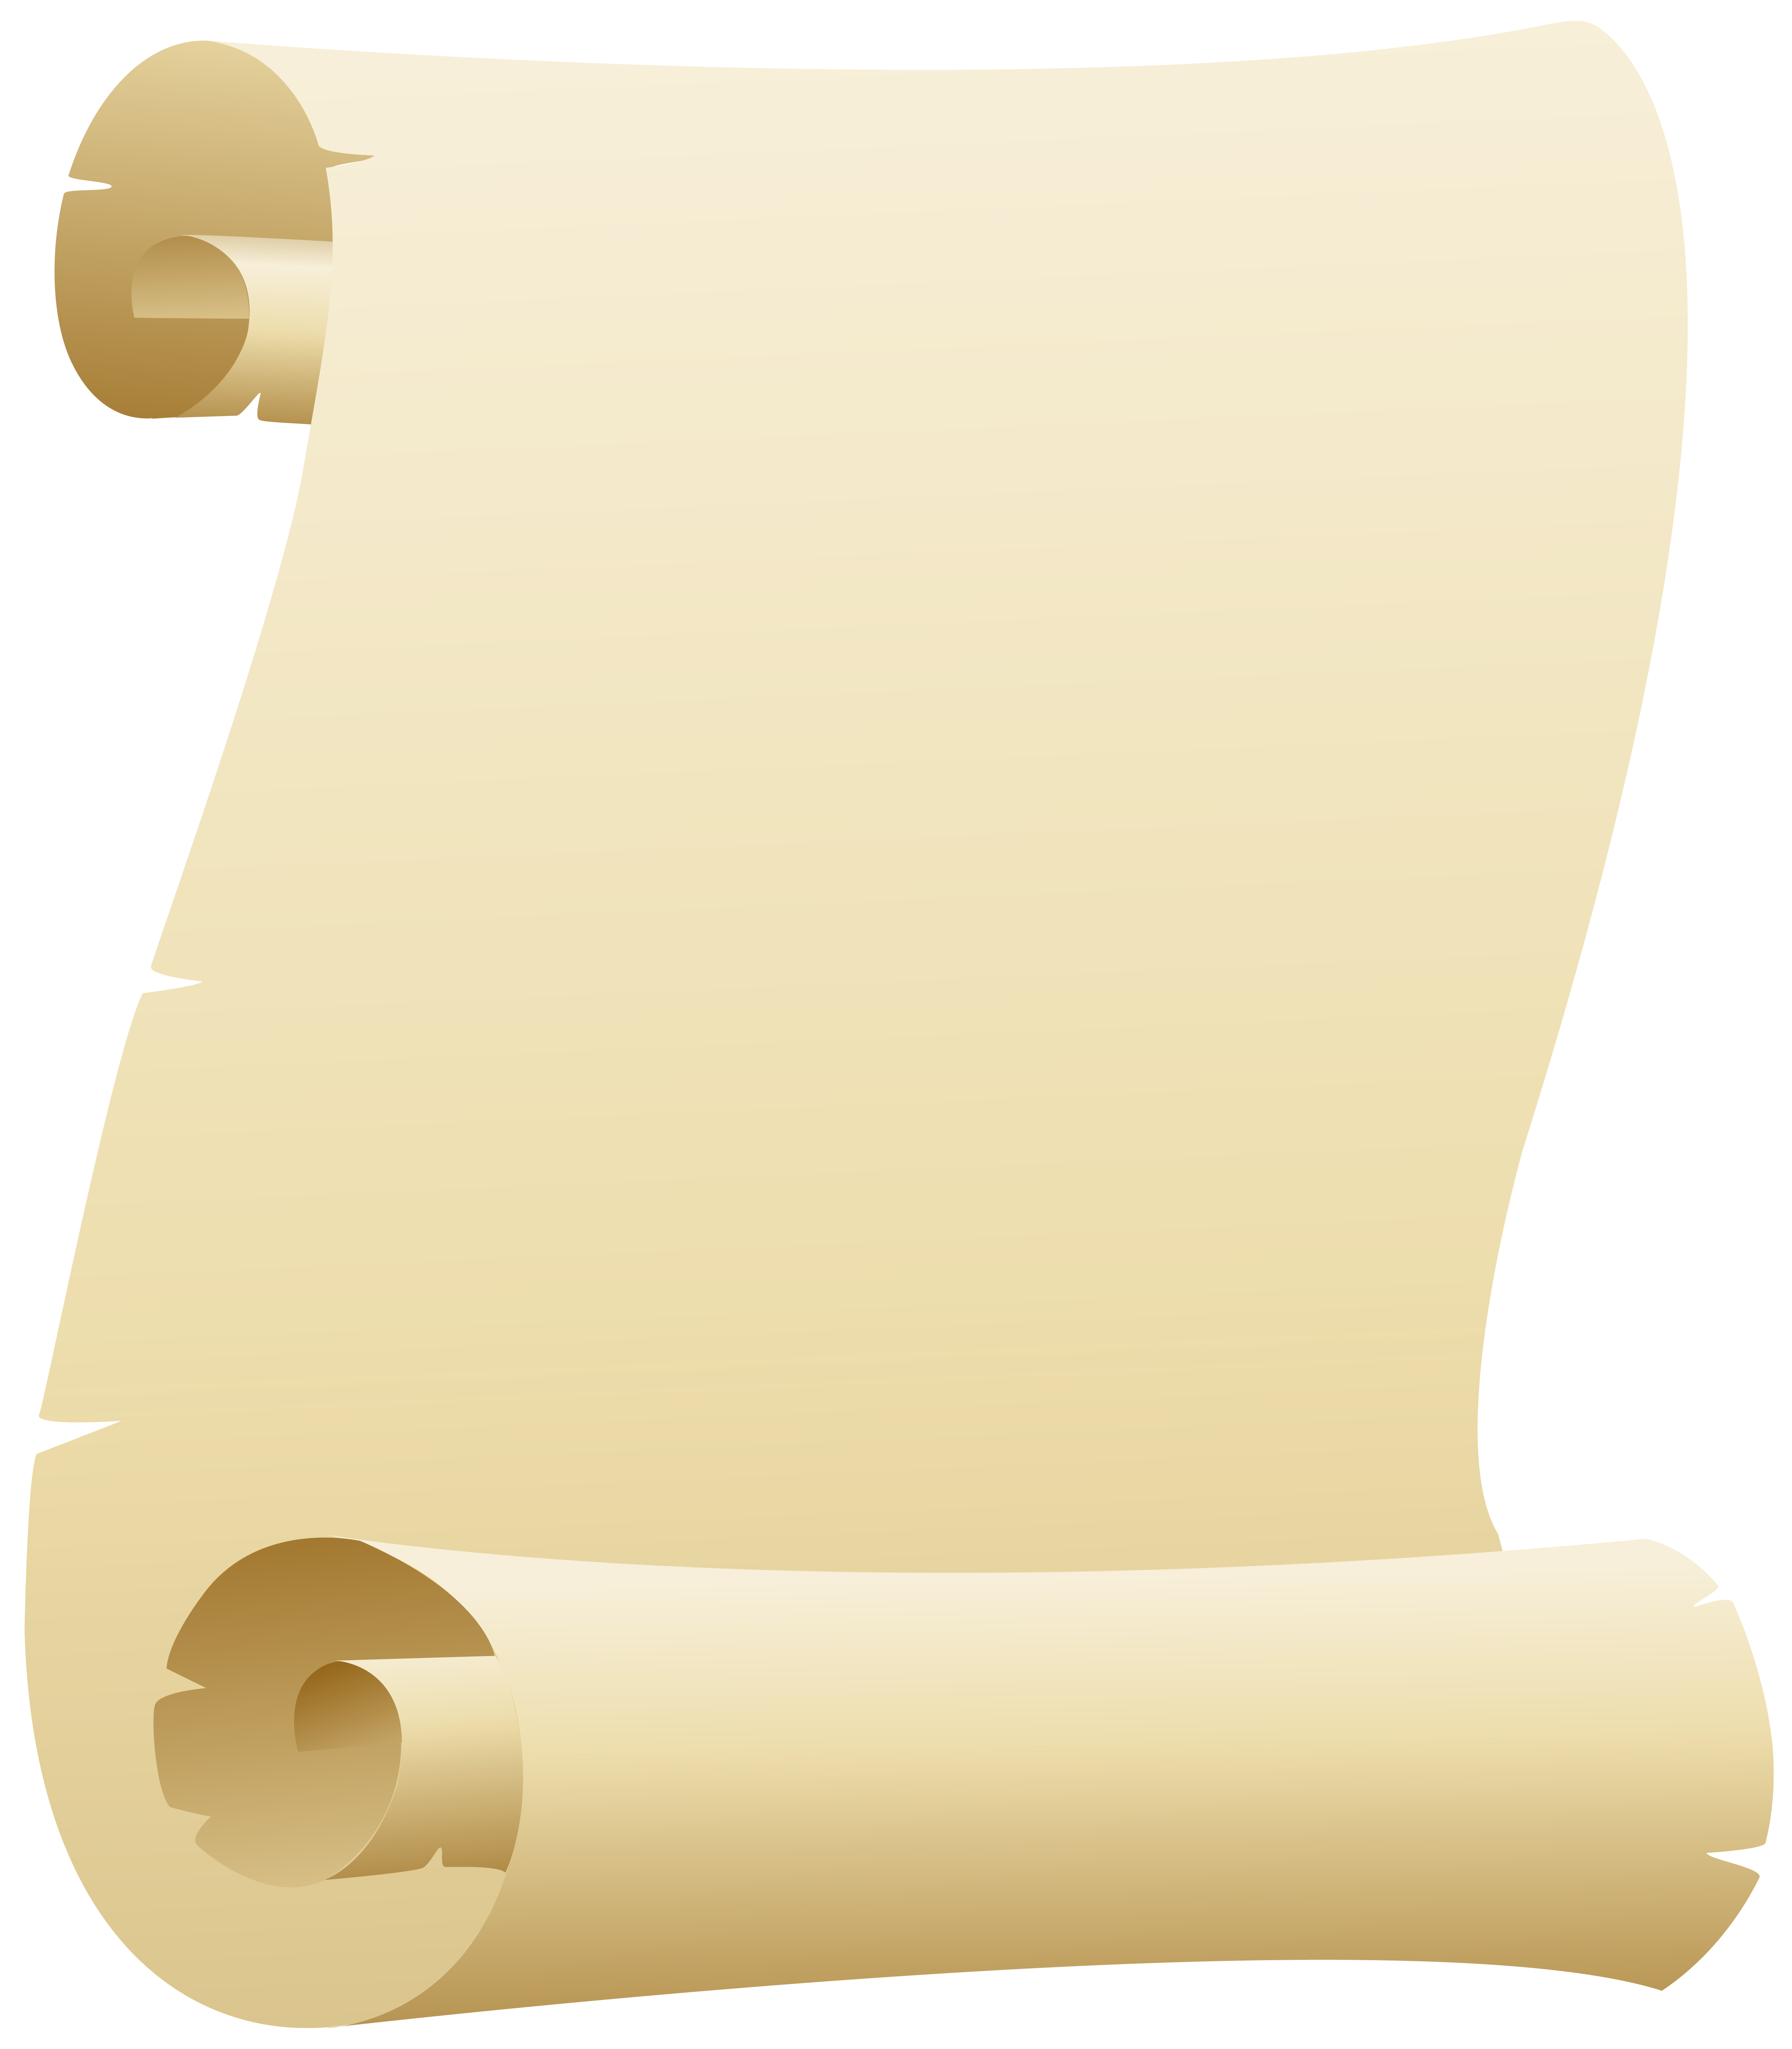 Scroll Clipart PNG Image.